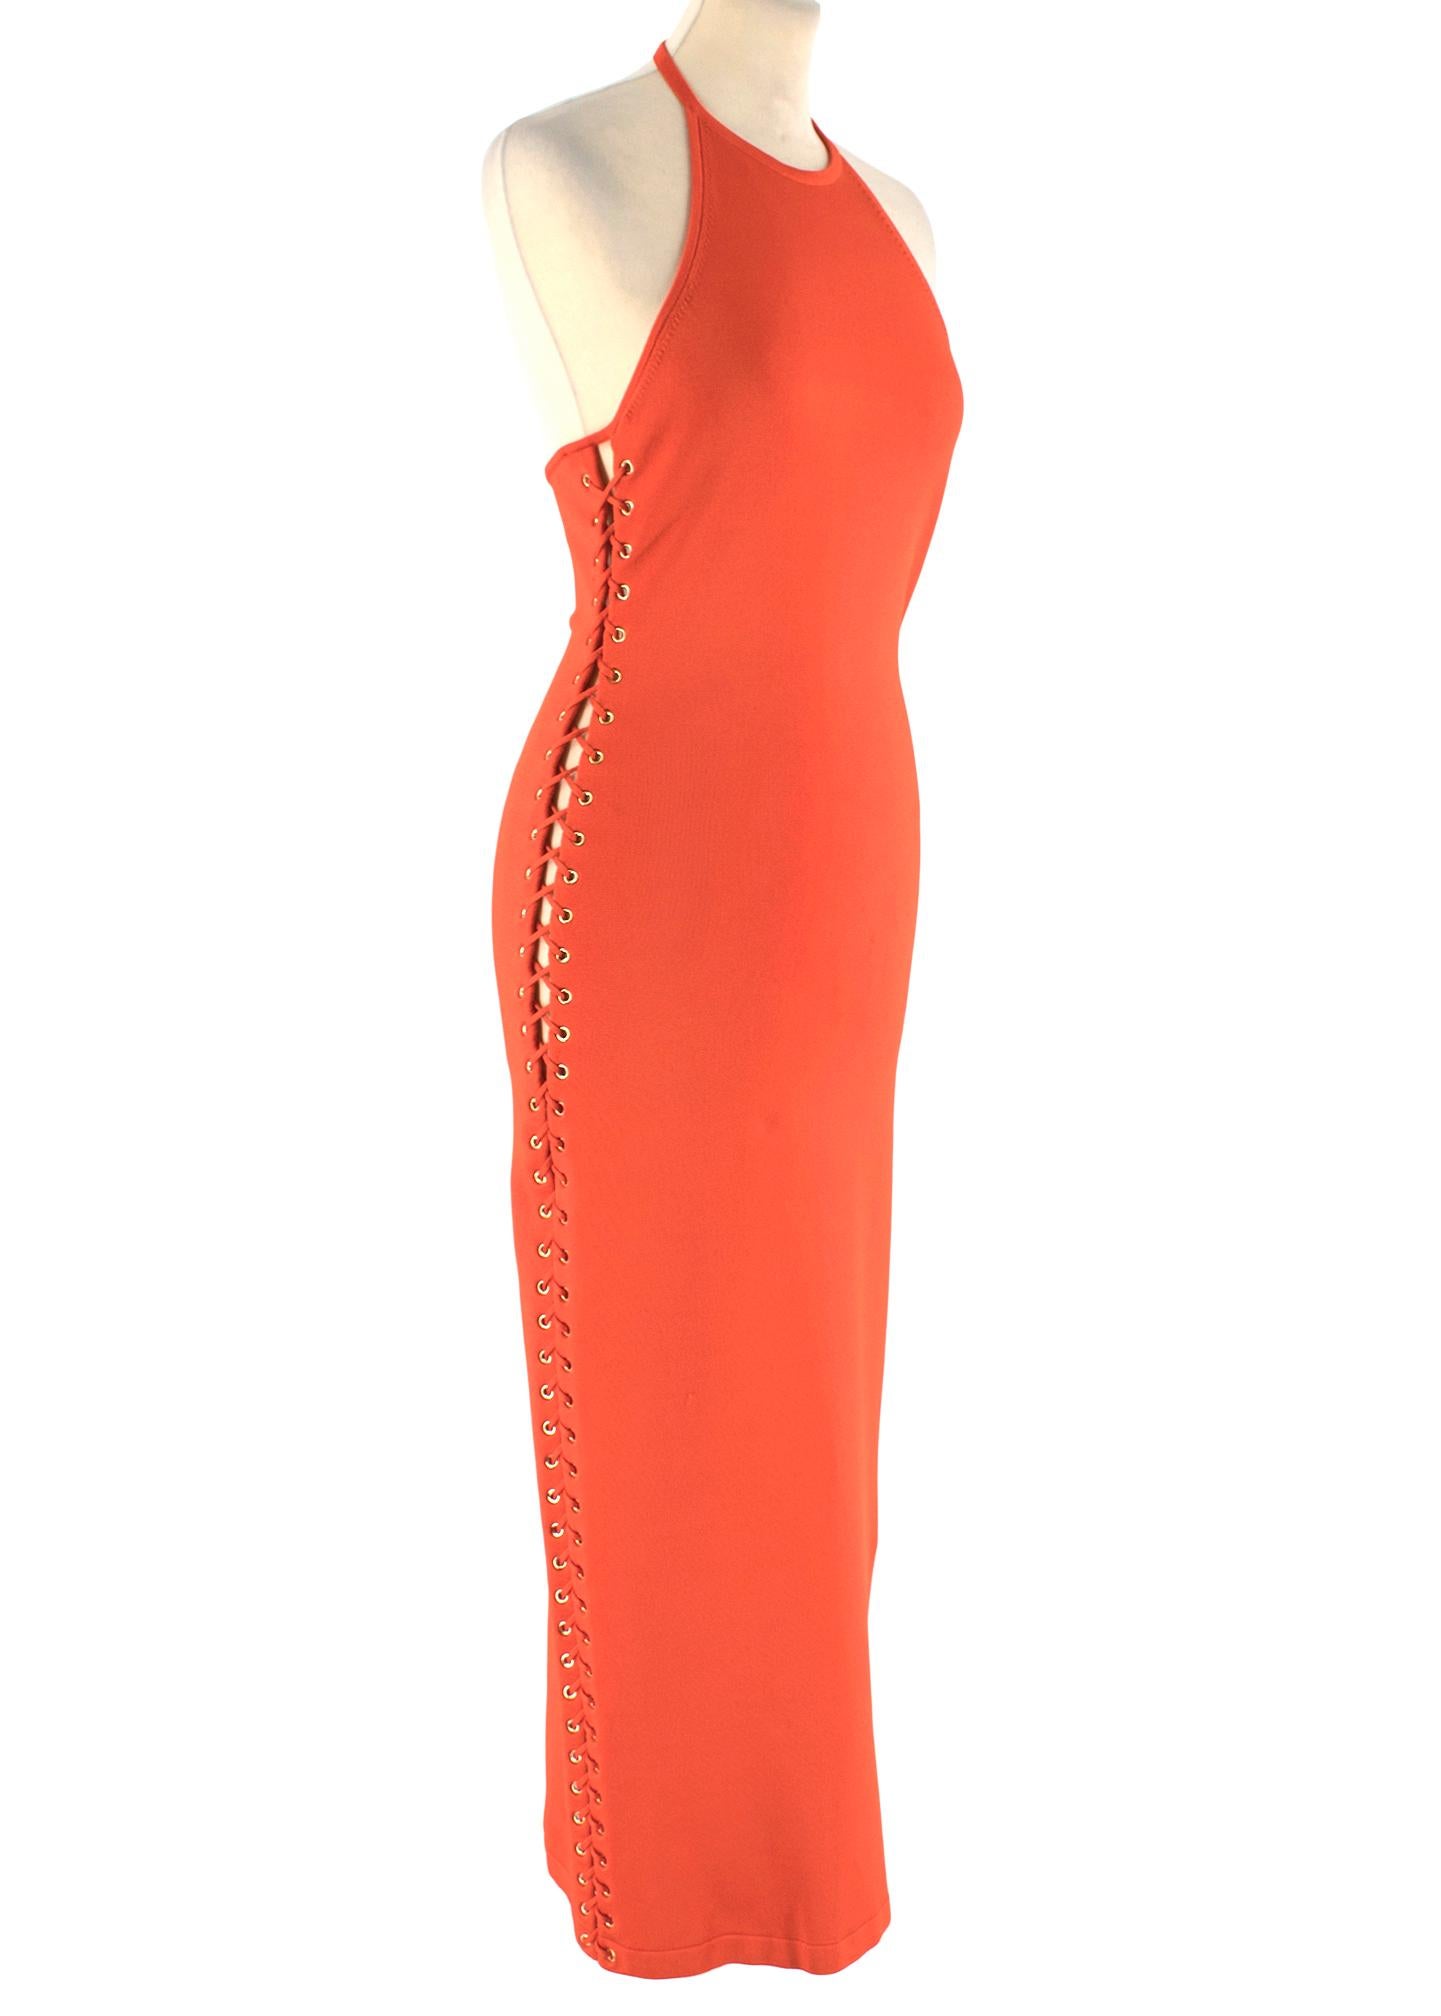 Balmain orange lace-up halter neck midi dress

- Mid-weight knit
- Halter neck, double push-stud fastening
- Open back
- Laced orange side feature, gold-tone metal eyelets
- Centre-back chunky gold-tone metal zip fastening

Please note, these items